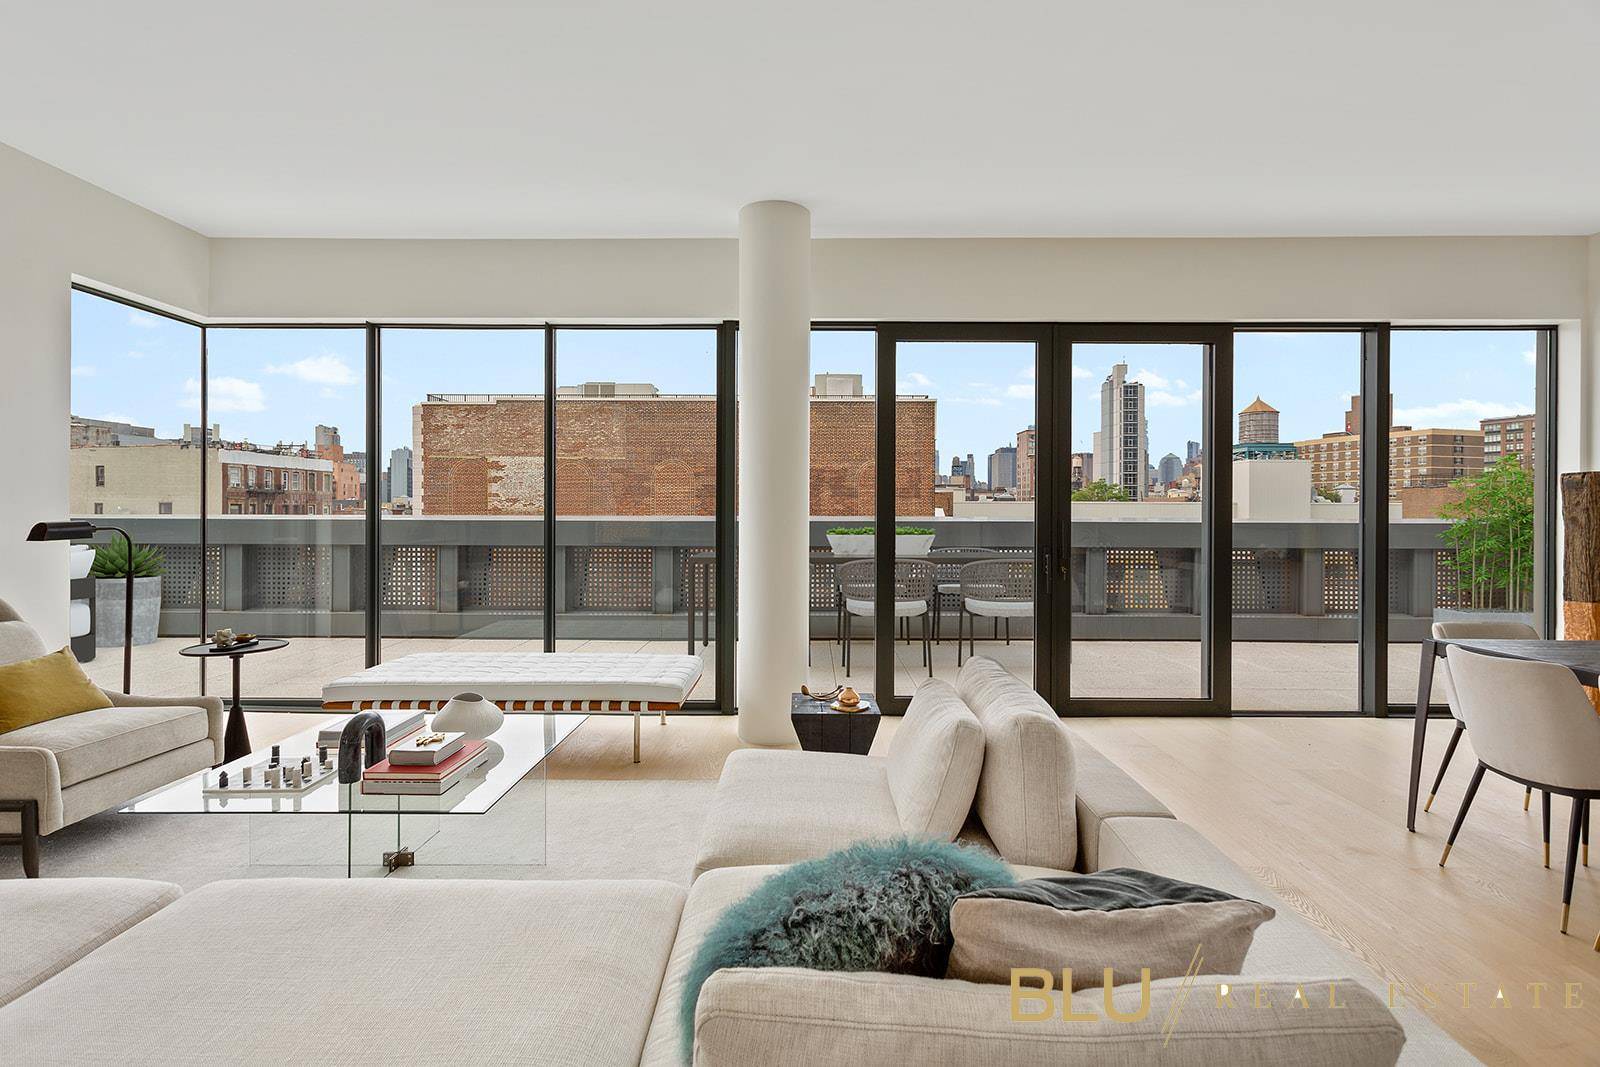 Luxury penthouse living is waiting for you at 45 East 7th.